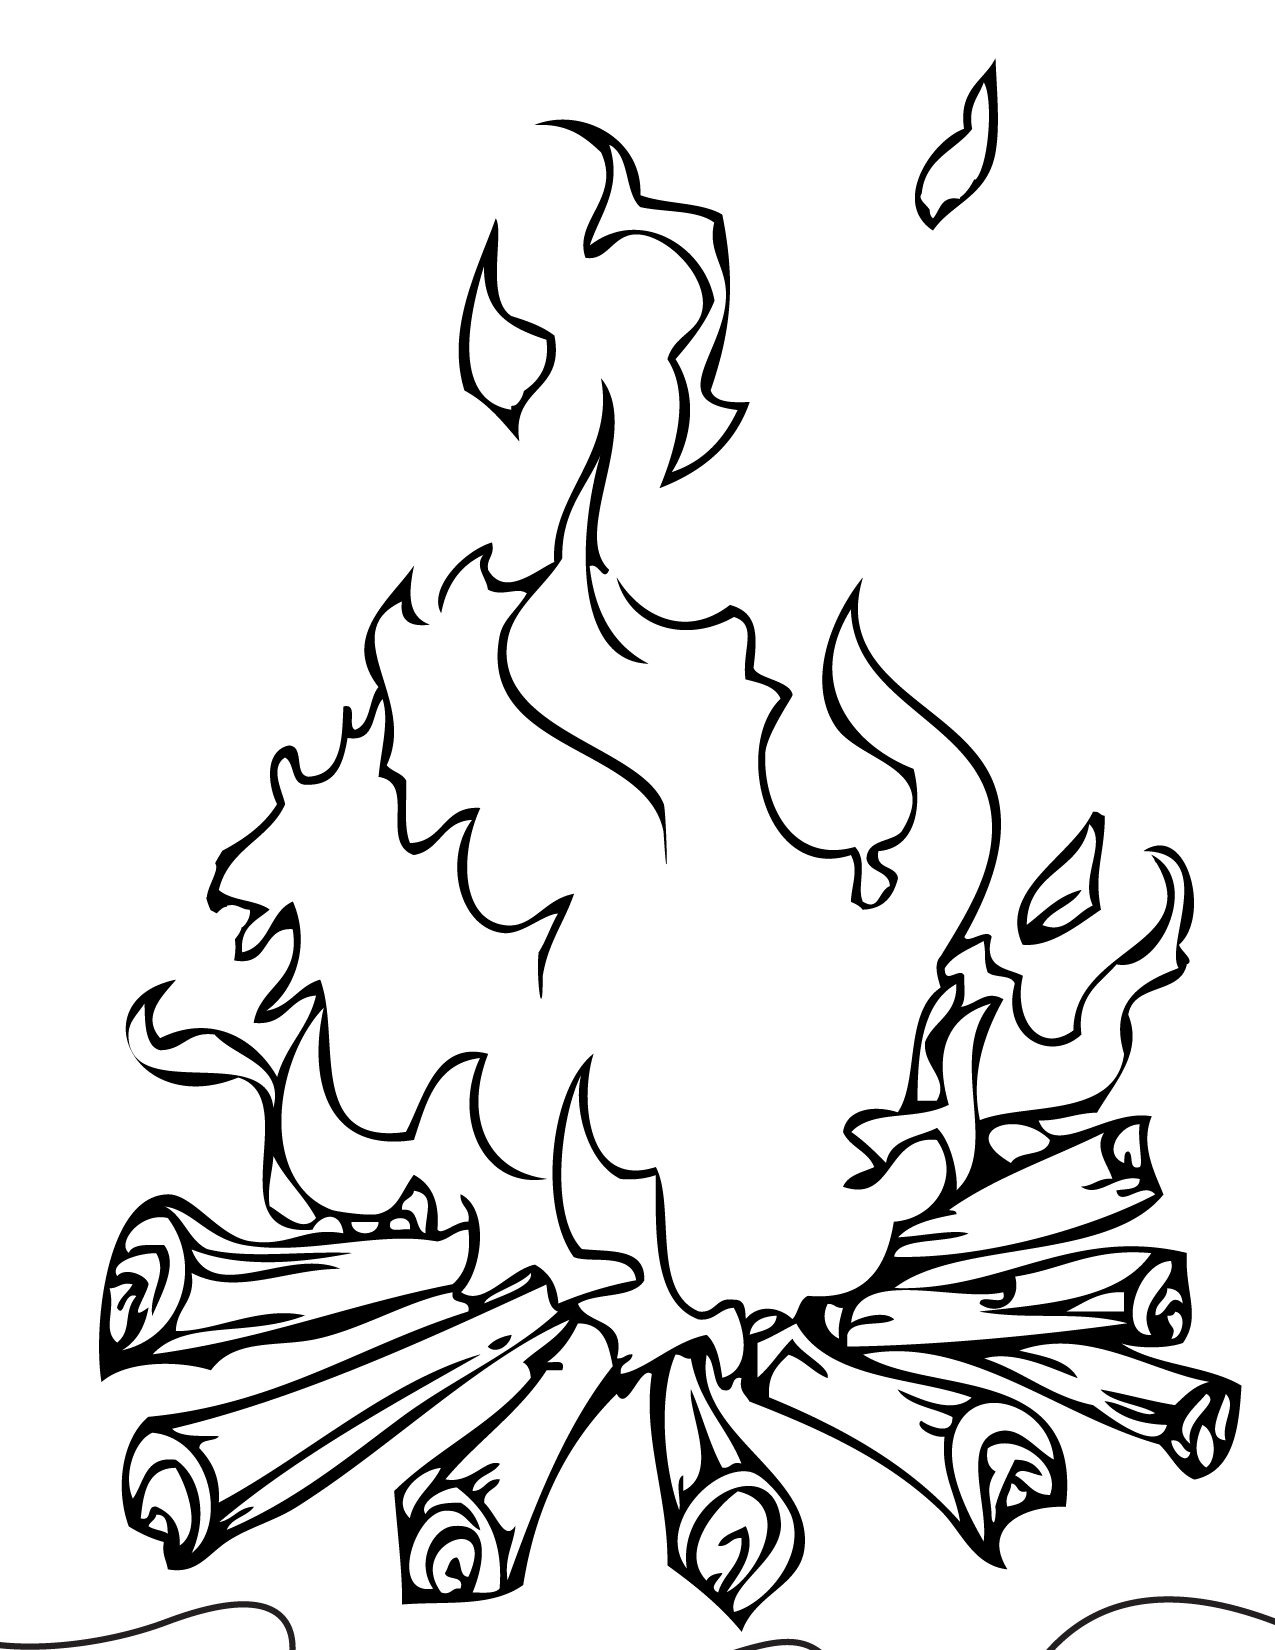 Print This Page   Camping Coloring Pages   Coloring Pages